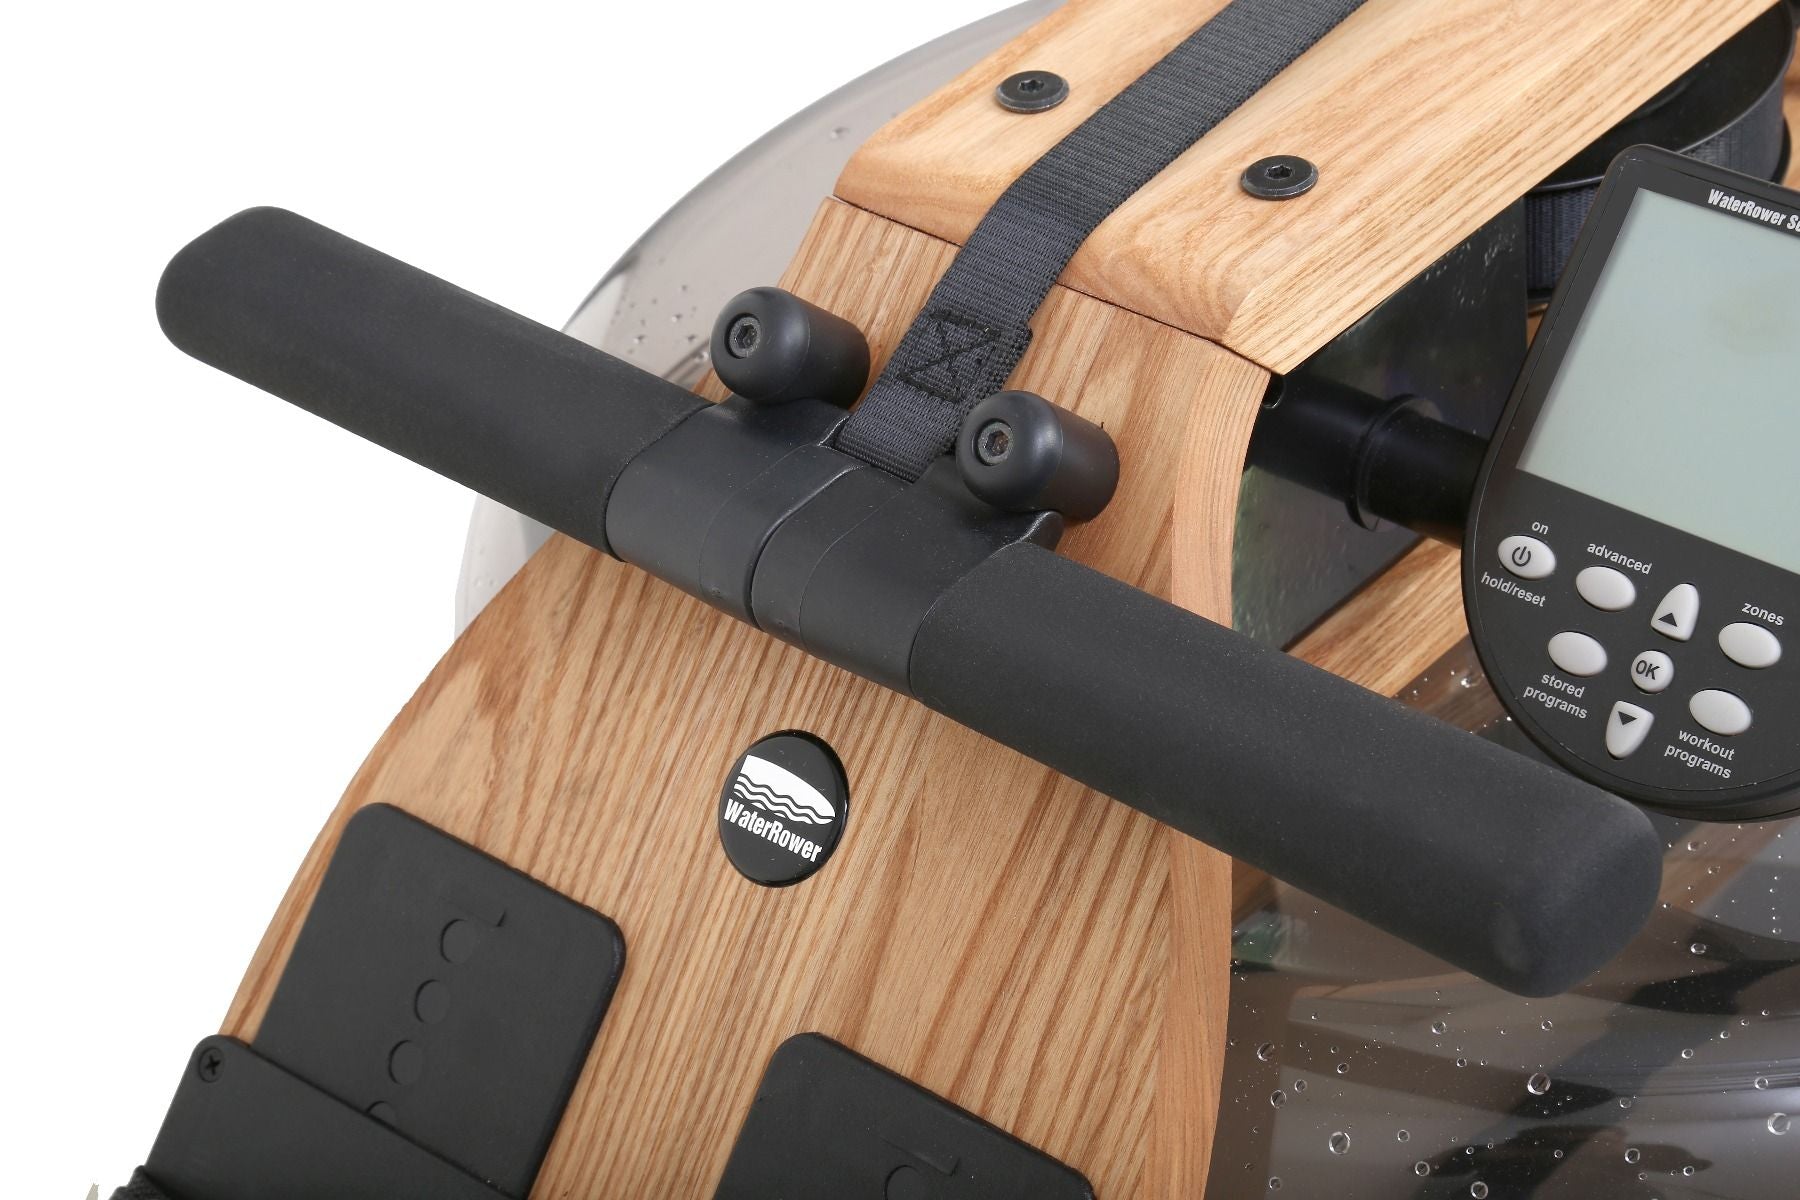 WaterRower Original Series Ash with S4 Performance Monitor